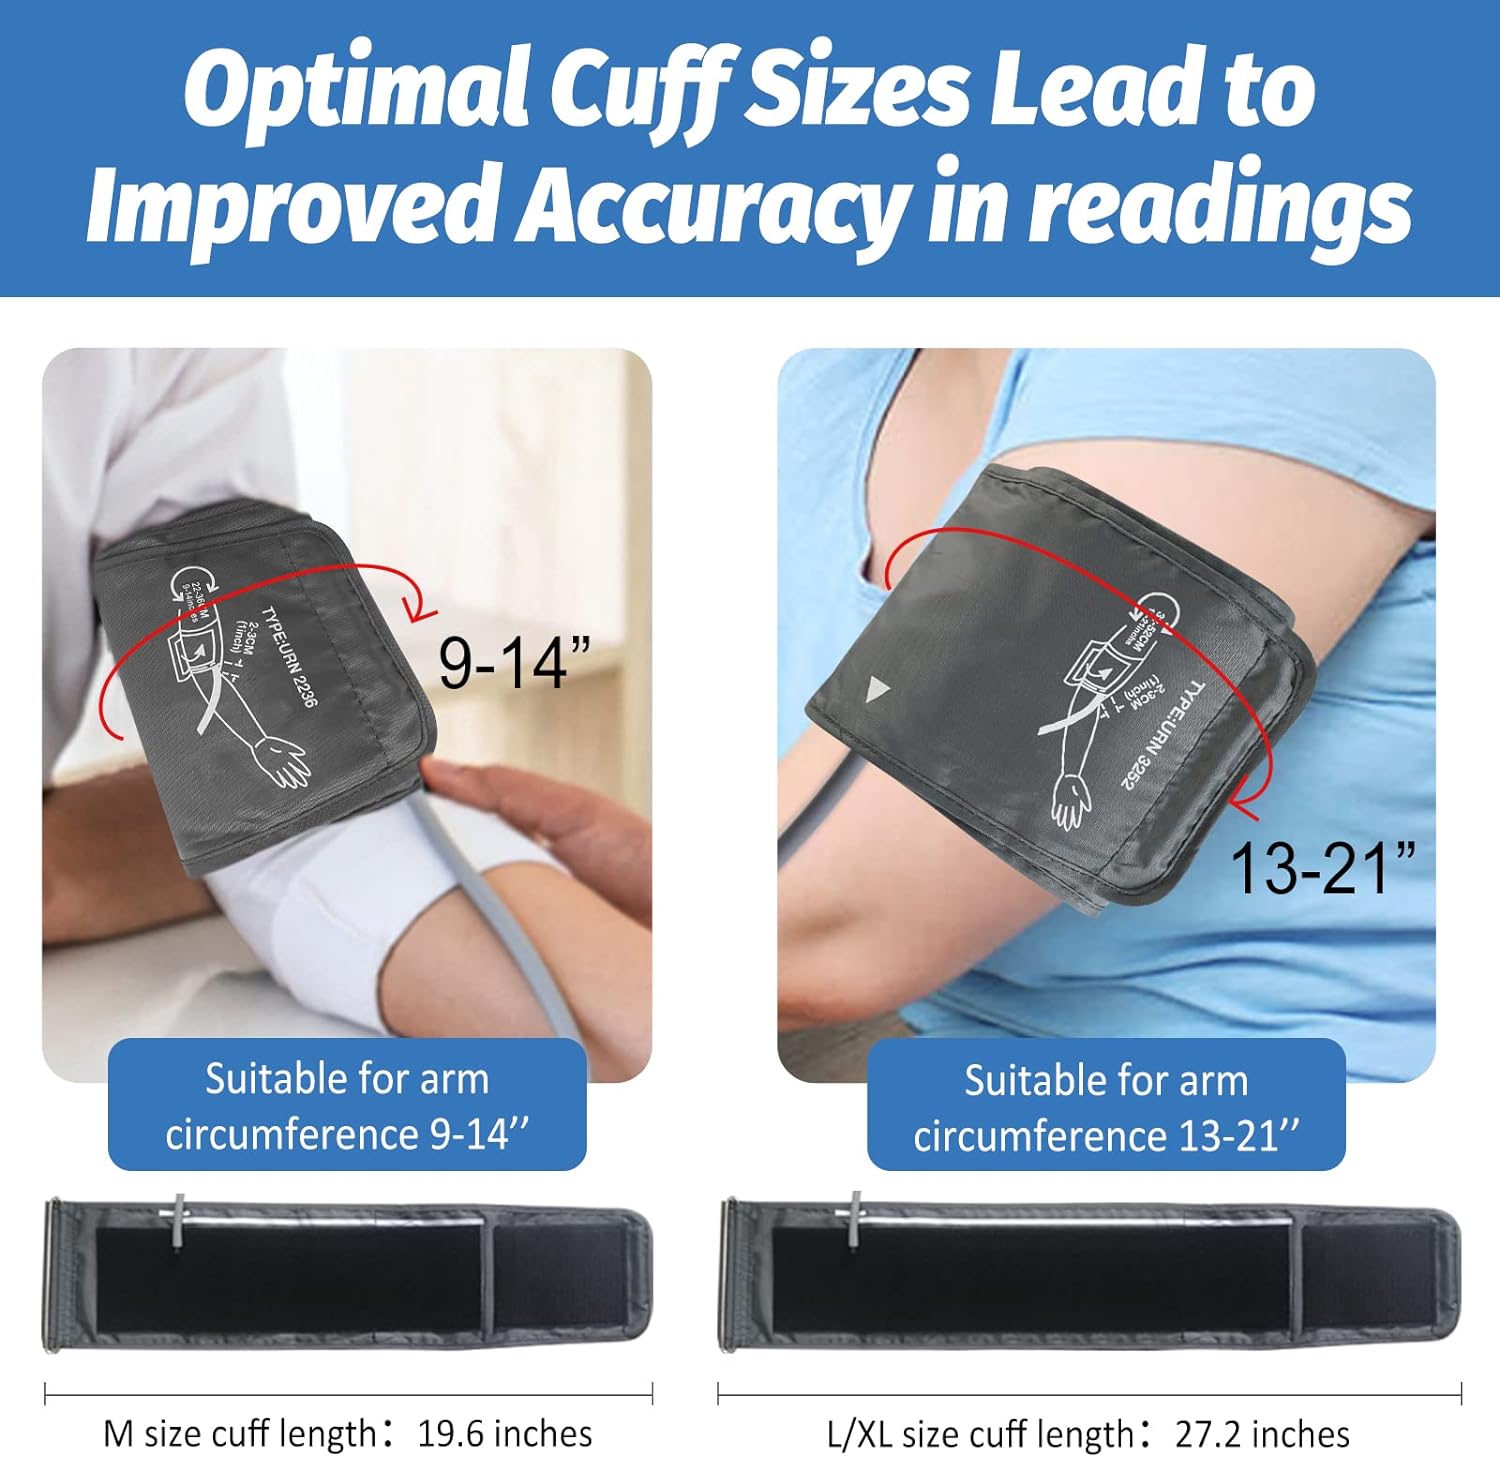 ELERA Blood Pressure Monitor with Two Cuffs - Extra Large Cuff 13-21 and Standard 9-14, Accurate Automatic BP Machine with Large Screen, USB Cable and 4 AAA Batteries - Ideal for Home Use